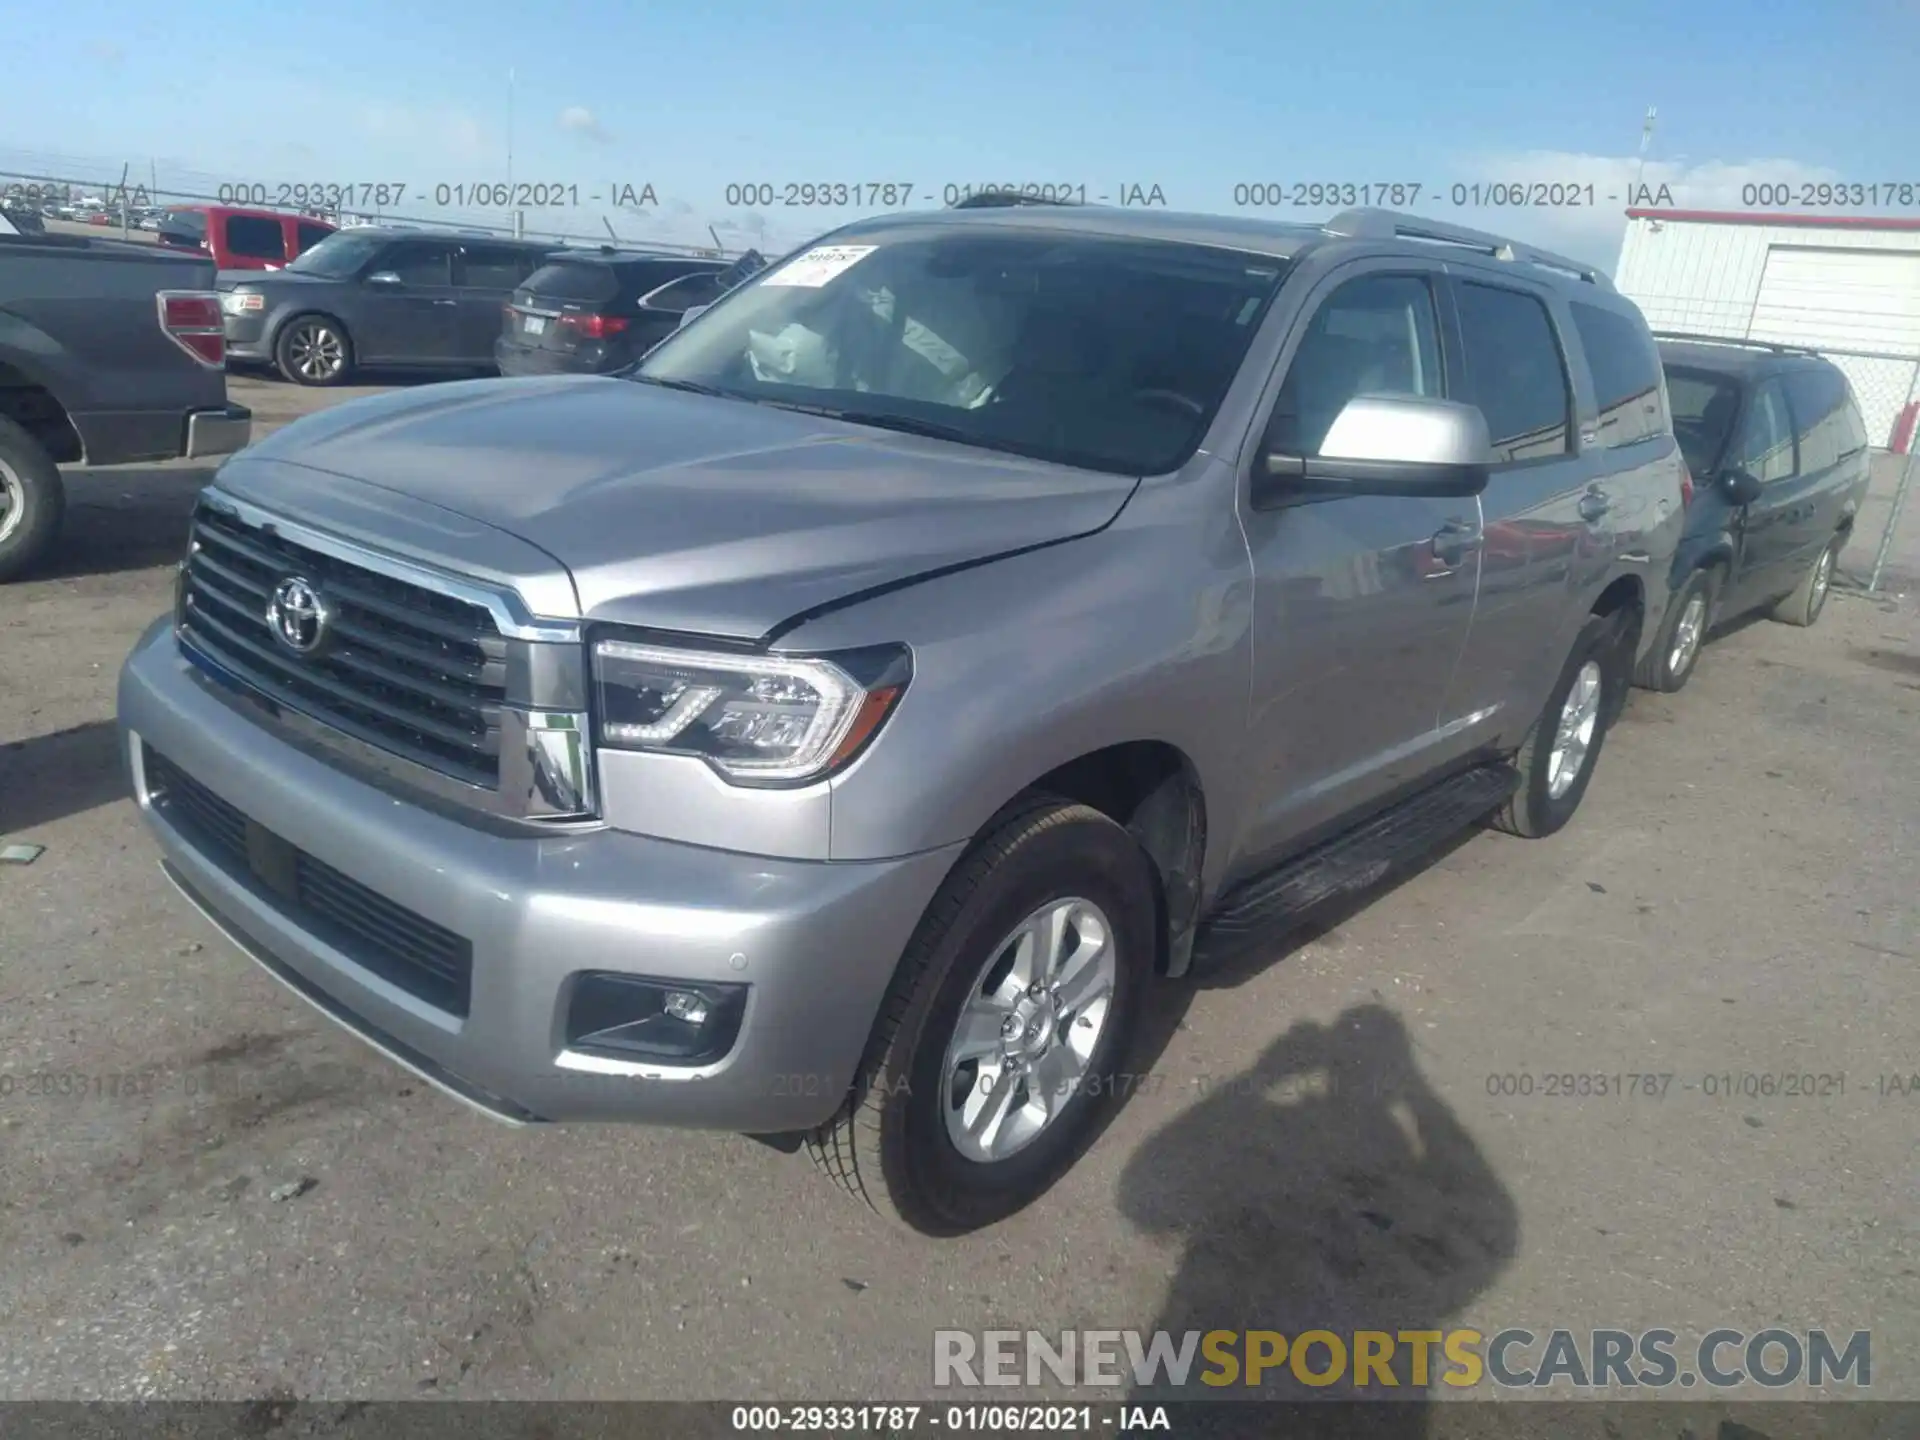 2 Photograph of a damaged car 5TDBY5G19KS166580 TOYOTA SEQUOIA 2019